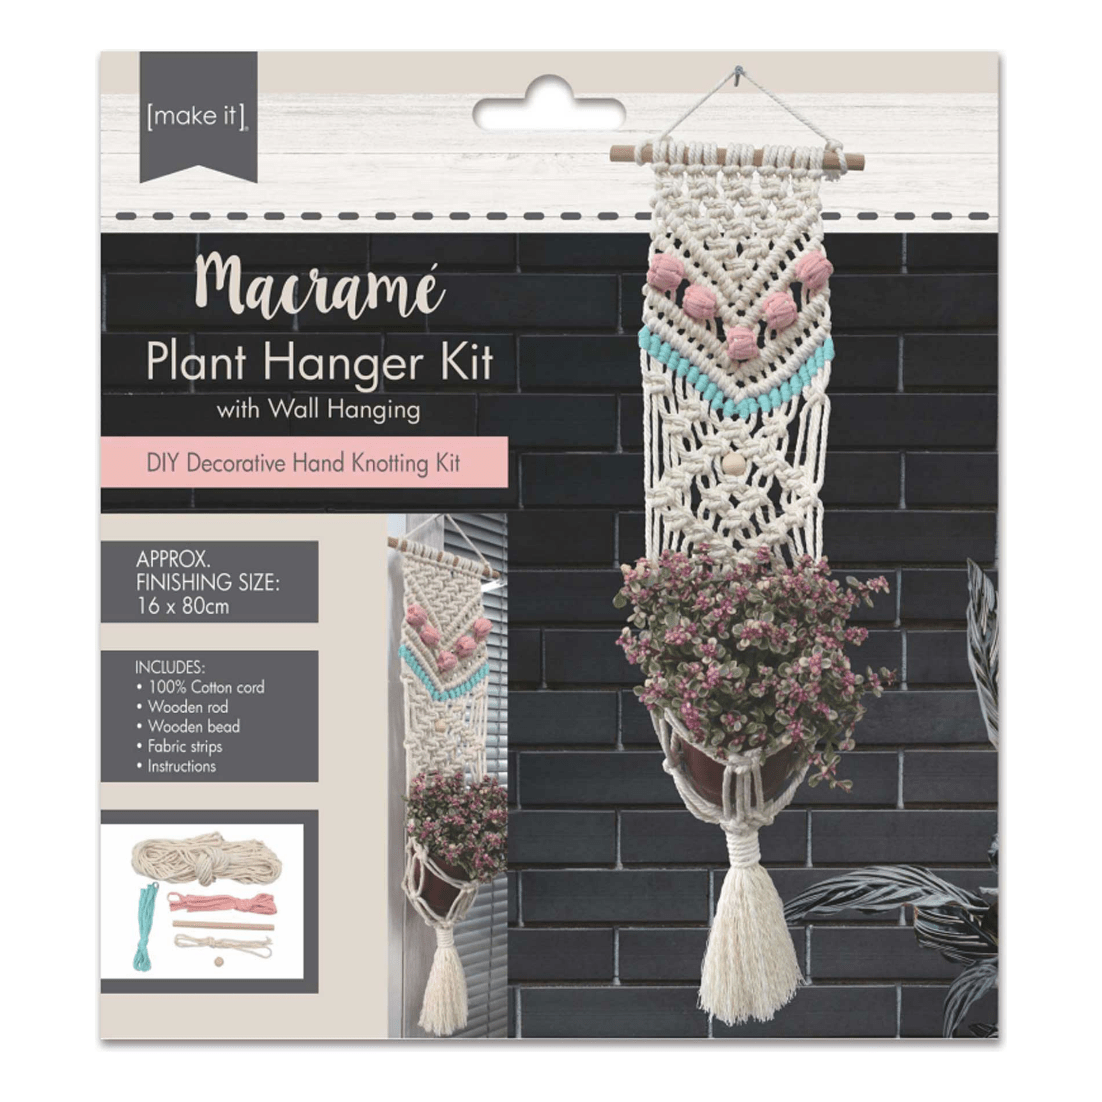 Macrame Plant Hanger Kit with Wall Hanging - Cream